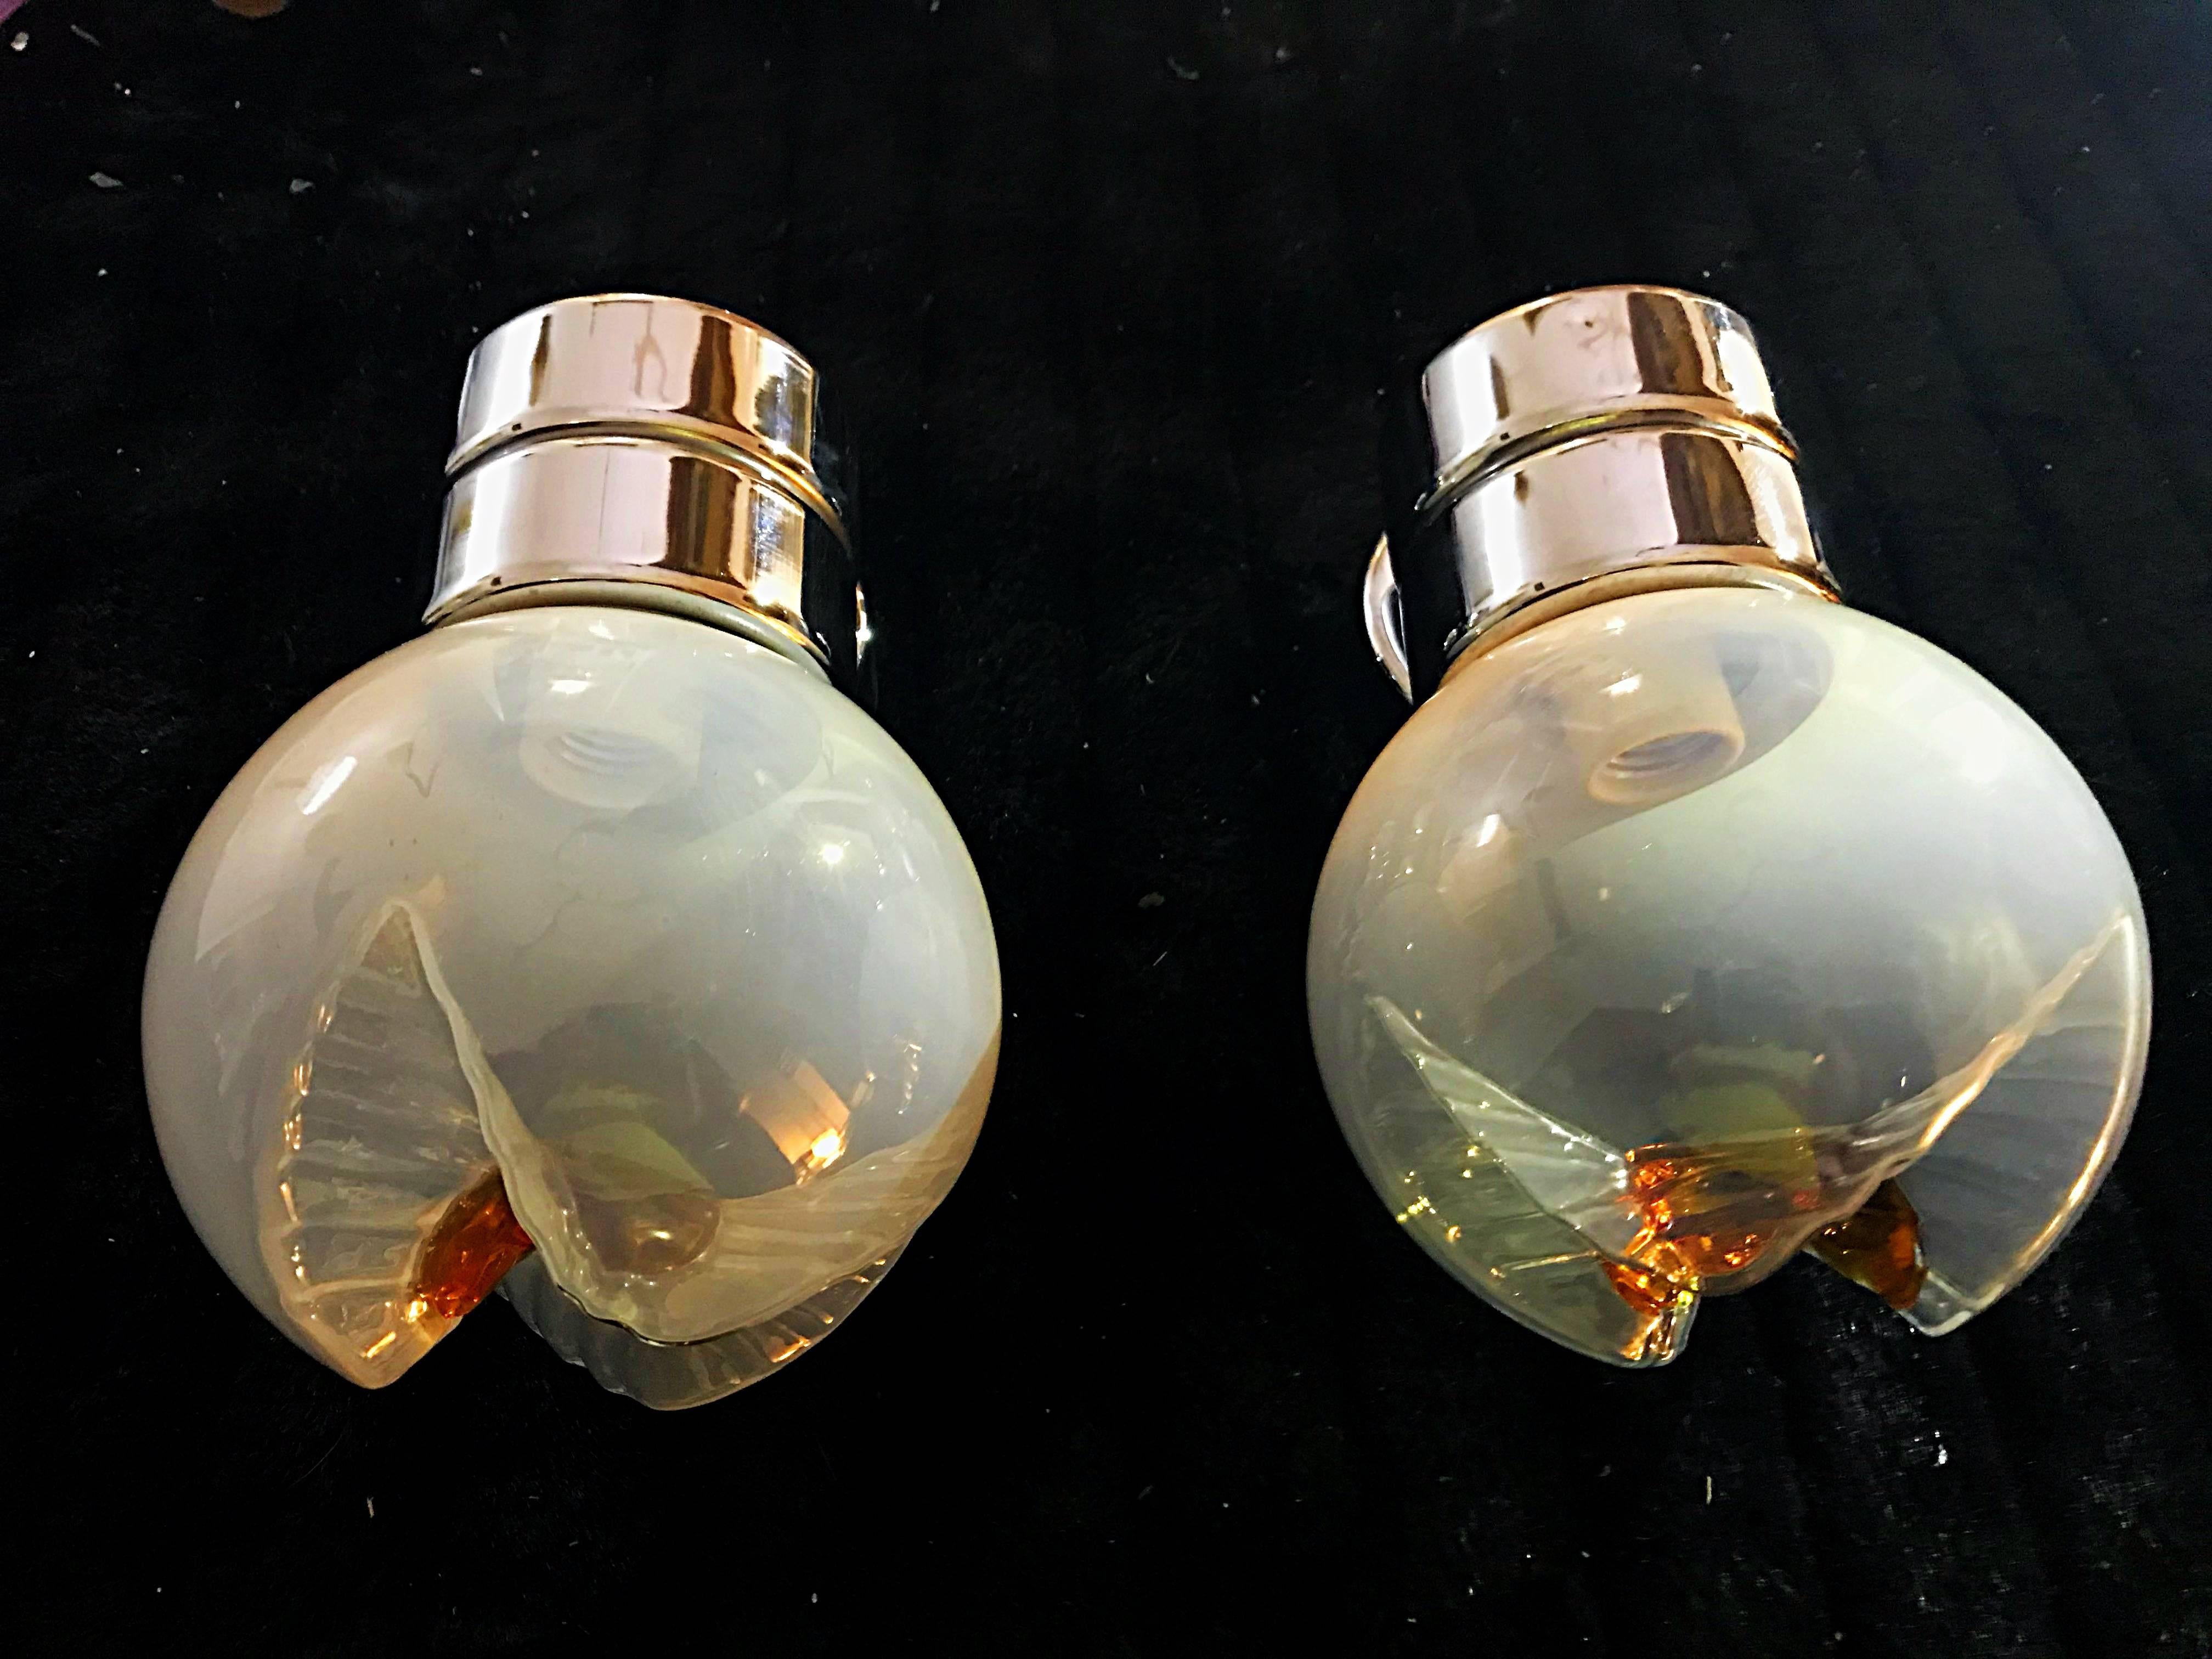 An appealing pair of Italian wall sconces, circa 1960s, by Mazzega. Each sconce has a colorful art glass shade in the form of a globe with amber coloring. The sconces have elegant sculptural chrome elements make the support of the Murano glass